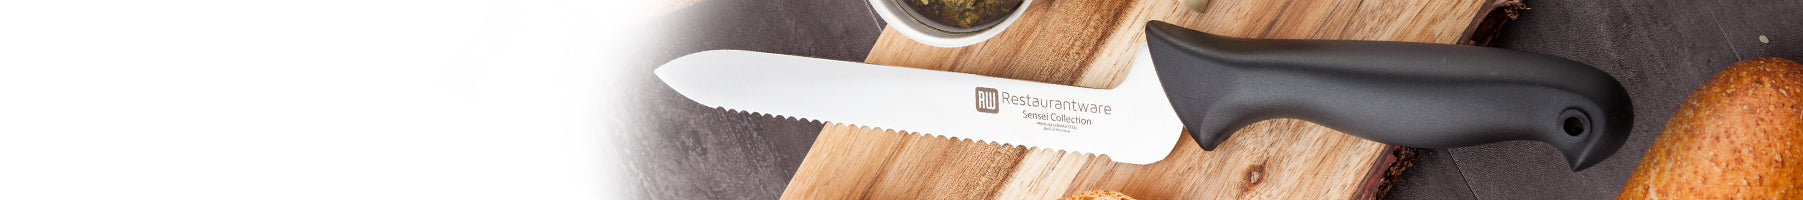 Banner_Smallwares_Kitchen-Knives-Cutlery_Bread-Knives_237